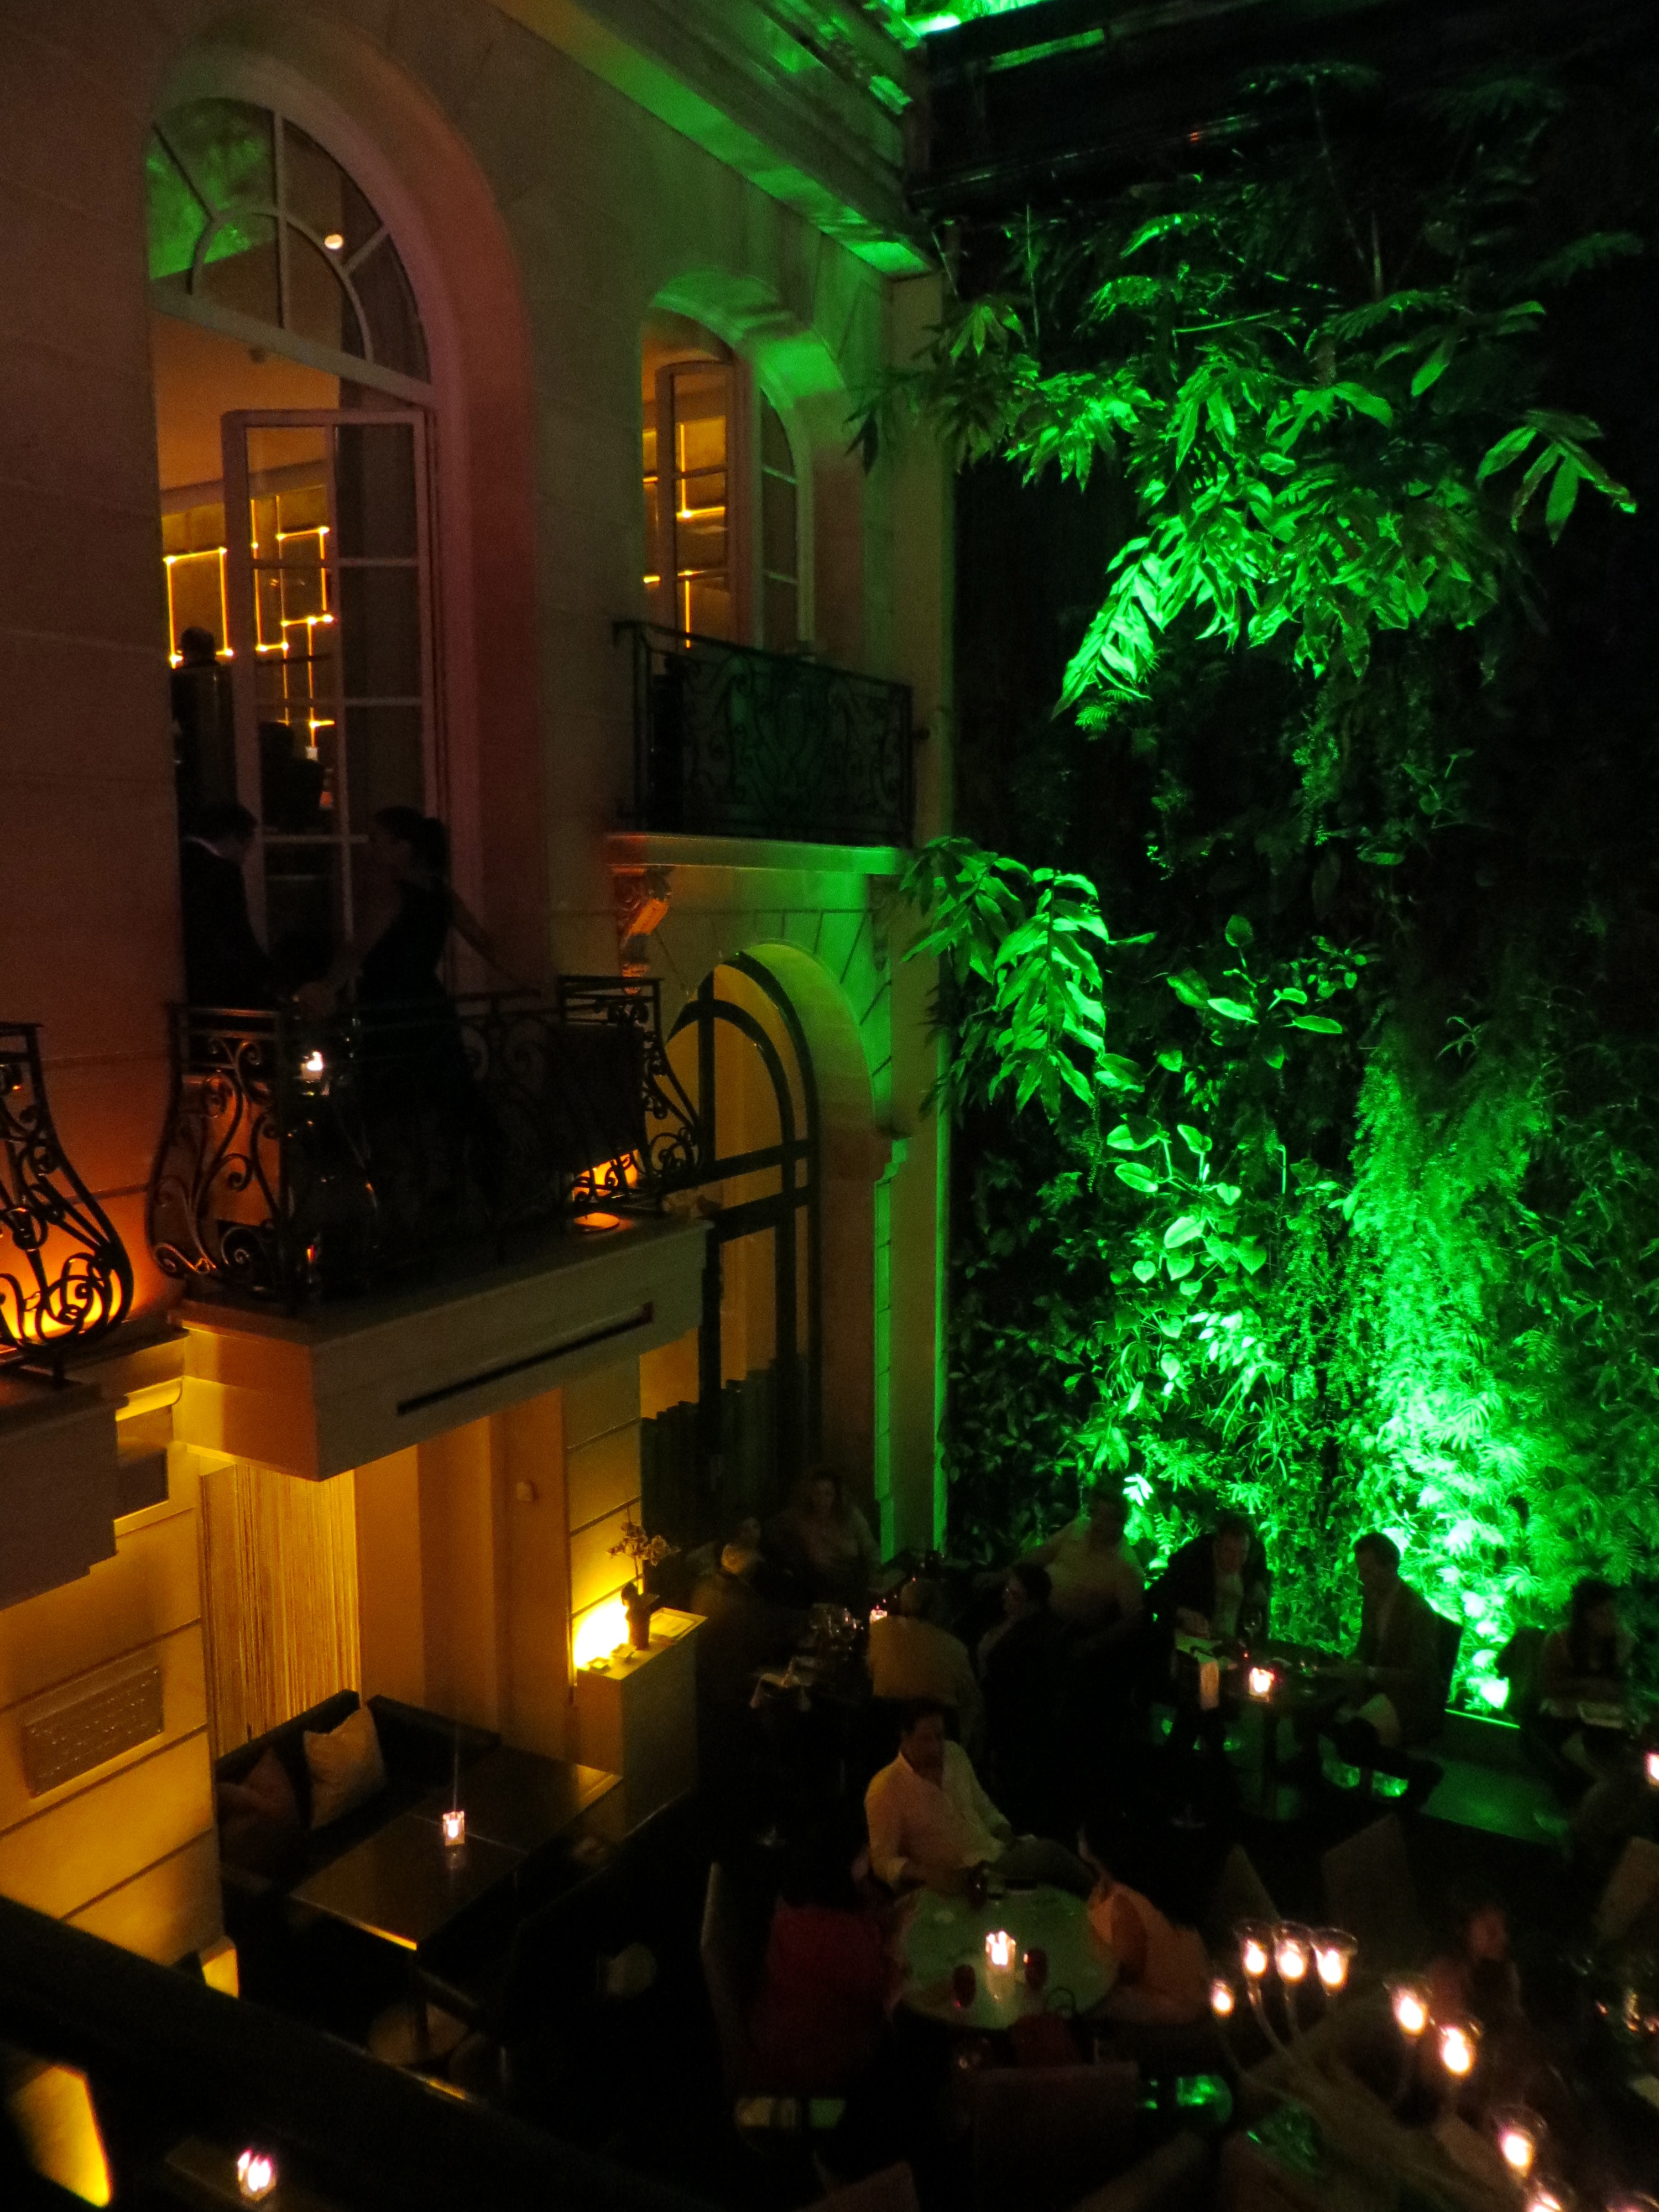 Chic After work party at Pershing hall in Paris